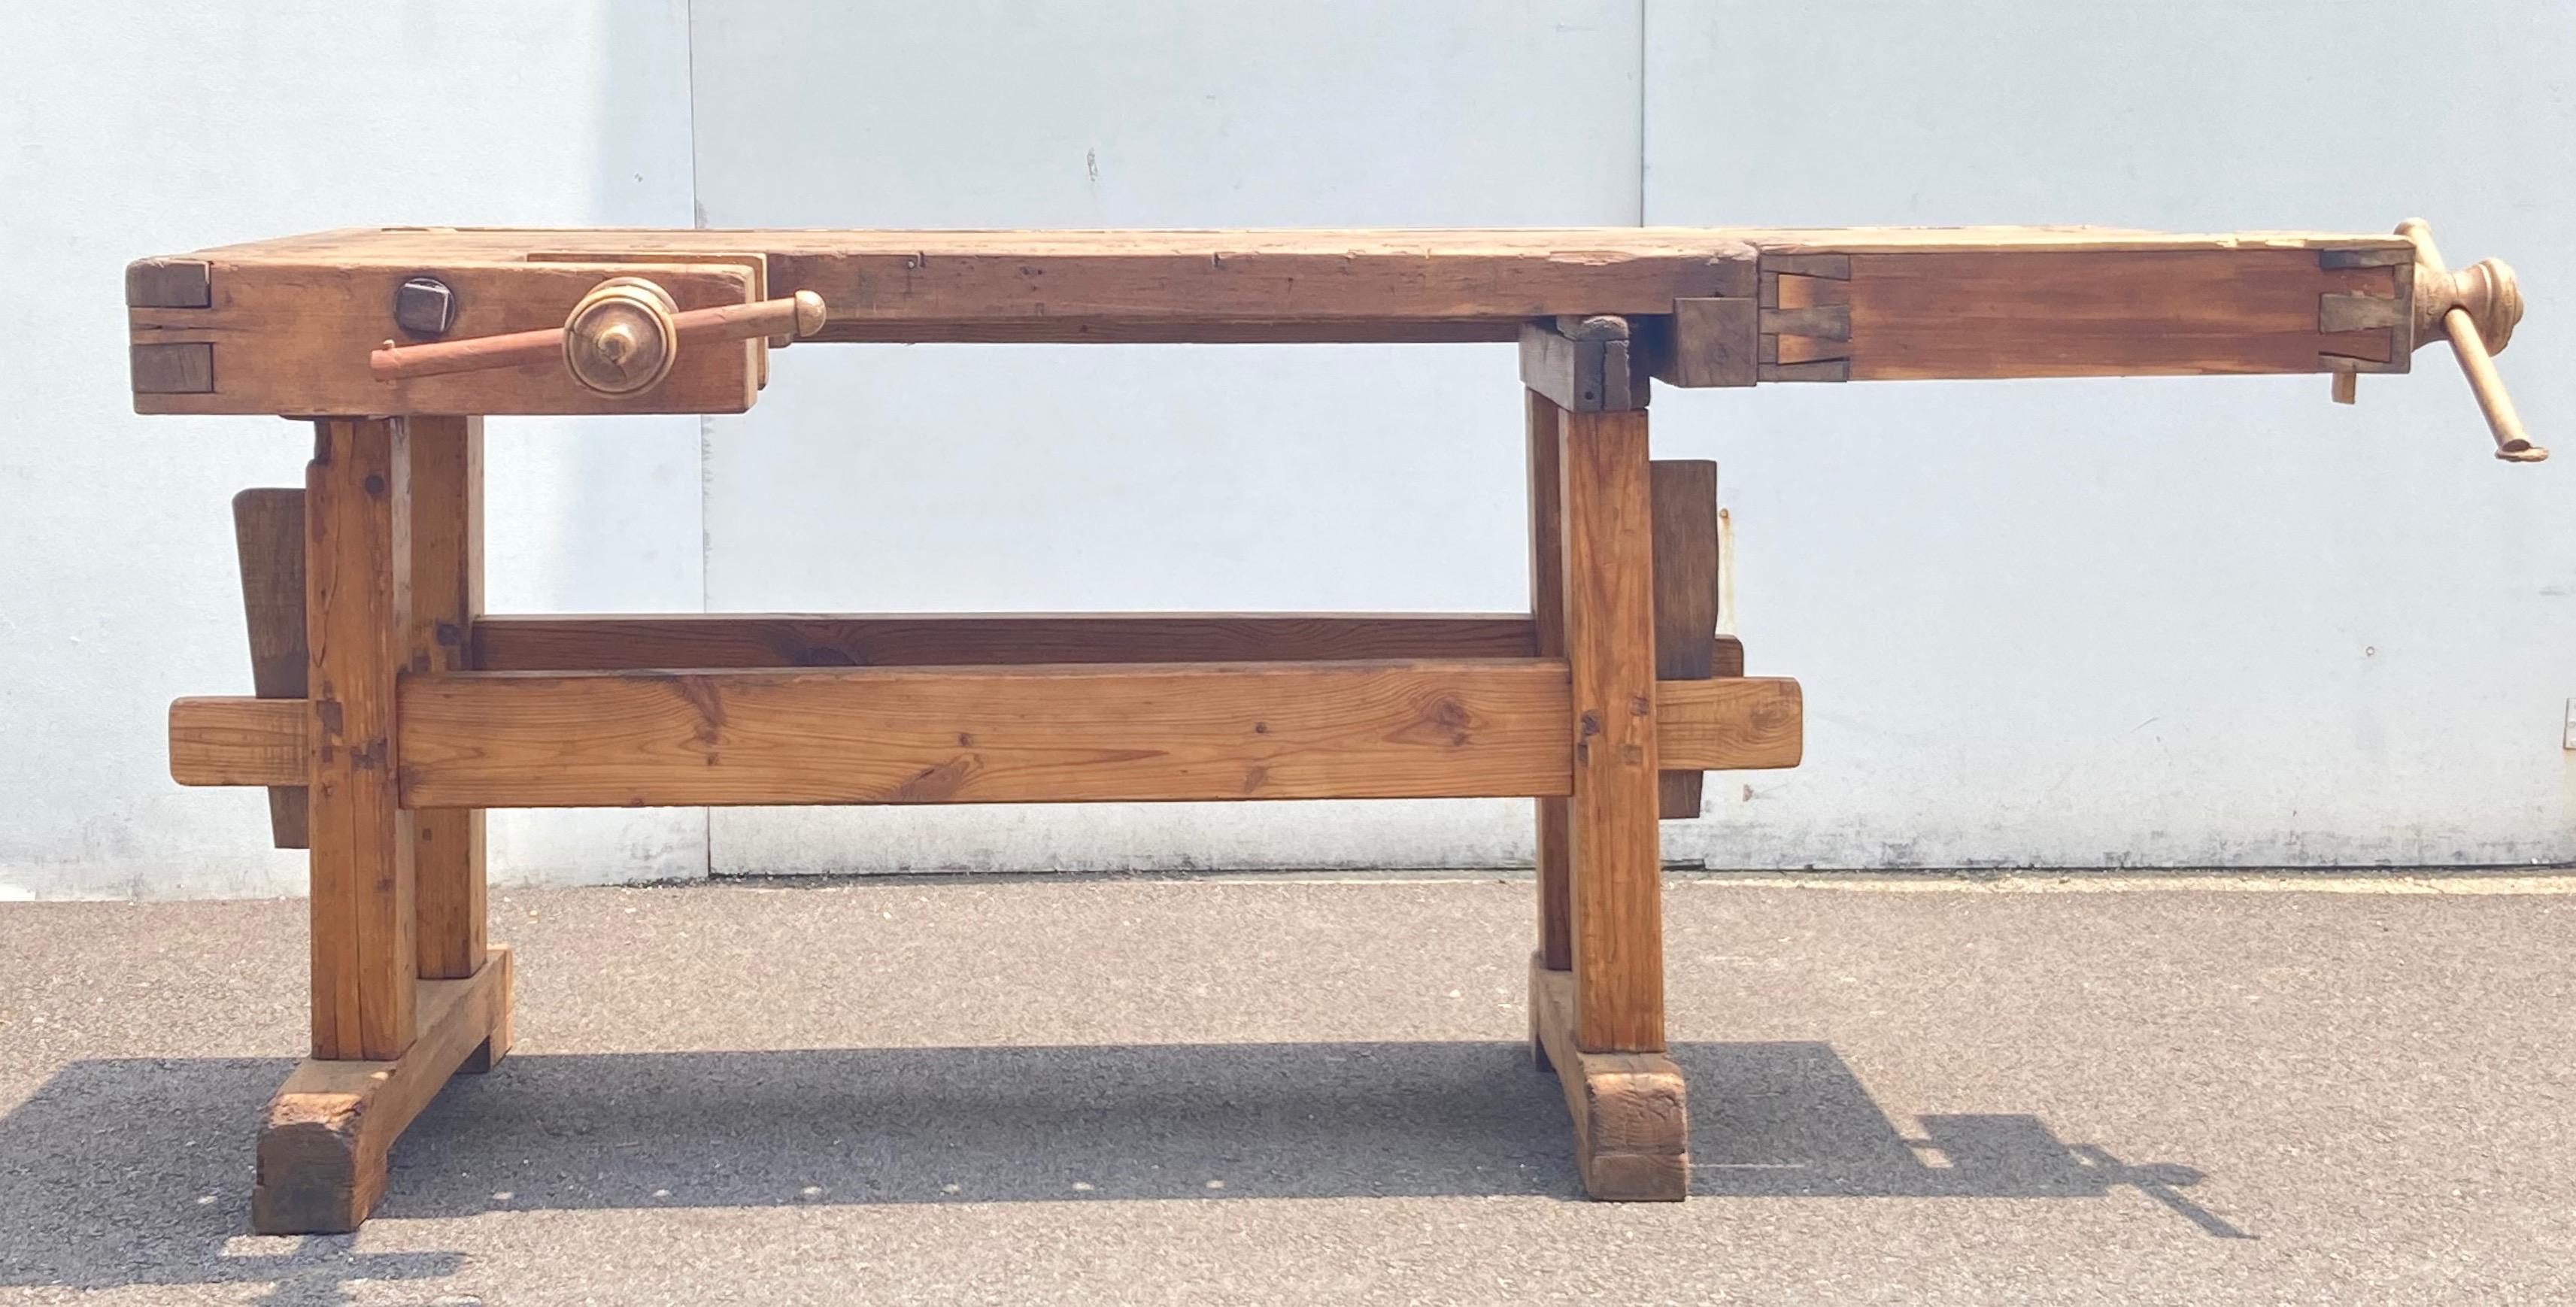 This beautifully chopped and gnarled carpenter’s workbench is built as solid as a rock.  The trestle-style base is made entirely of oak.  The uprights are hand-cut, through-tenoned and pegged top and bottom to the horizontal members. The trestles